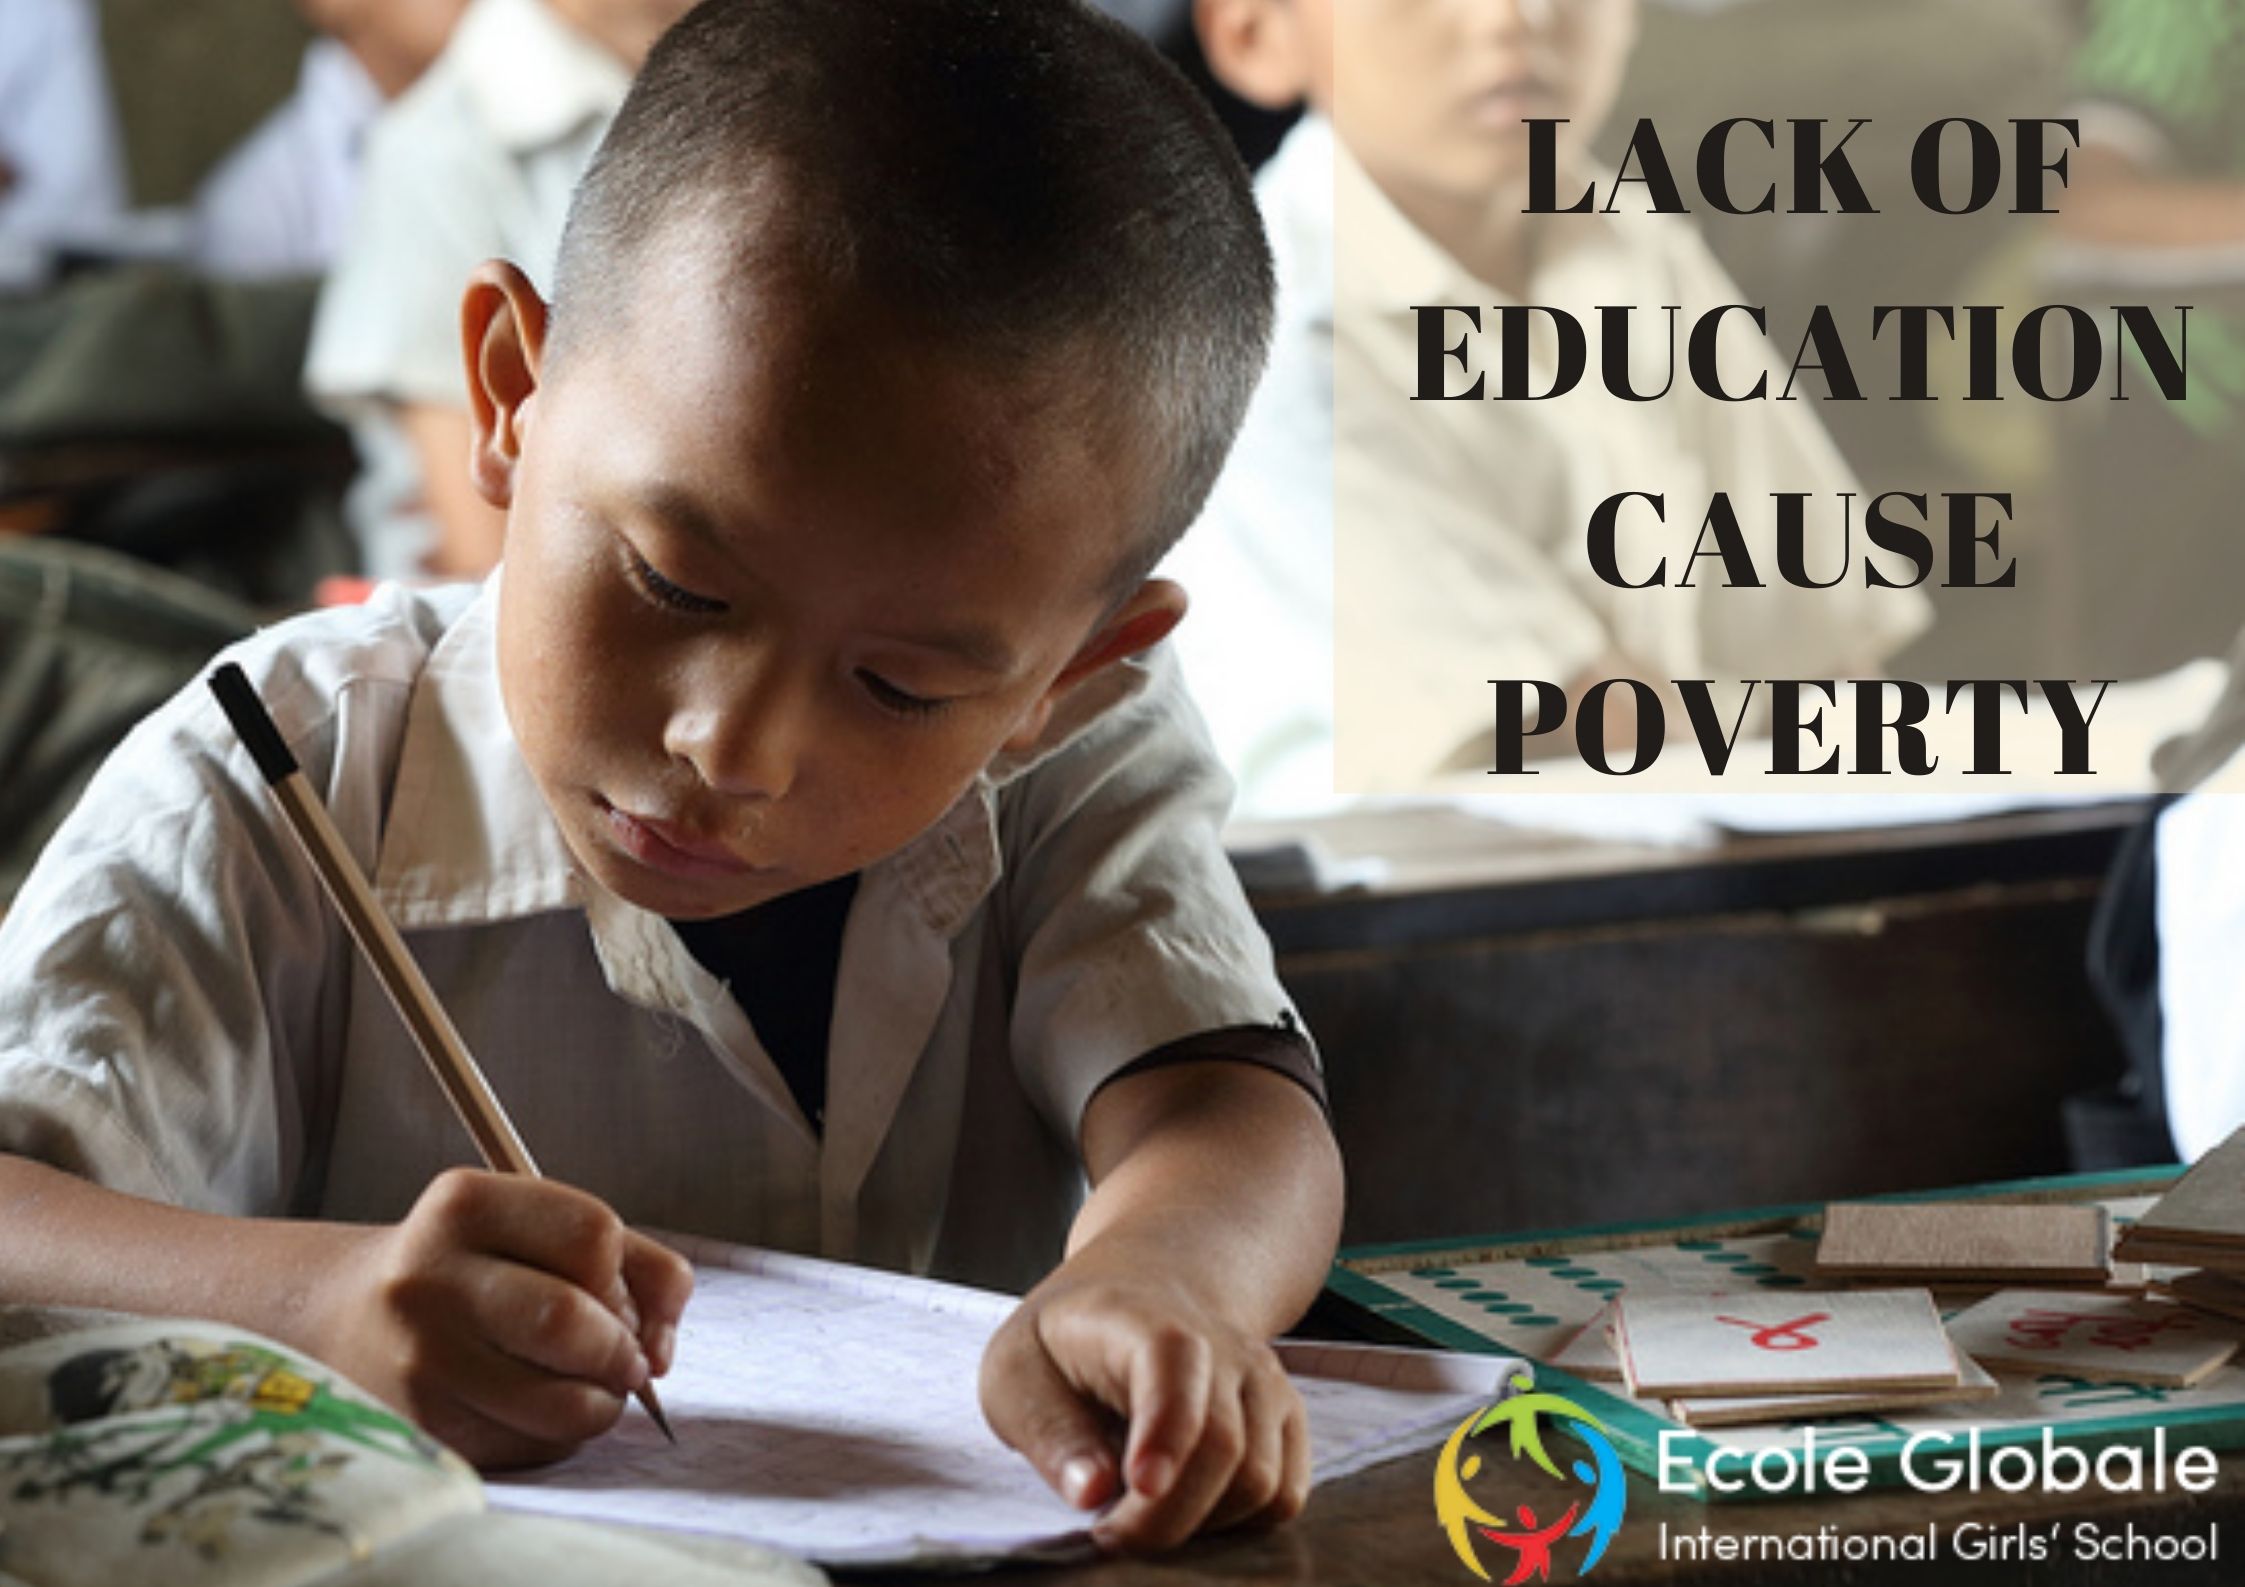 How does the lack of education cause poverty?